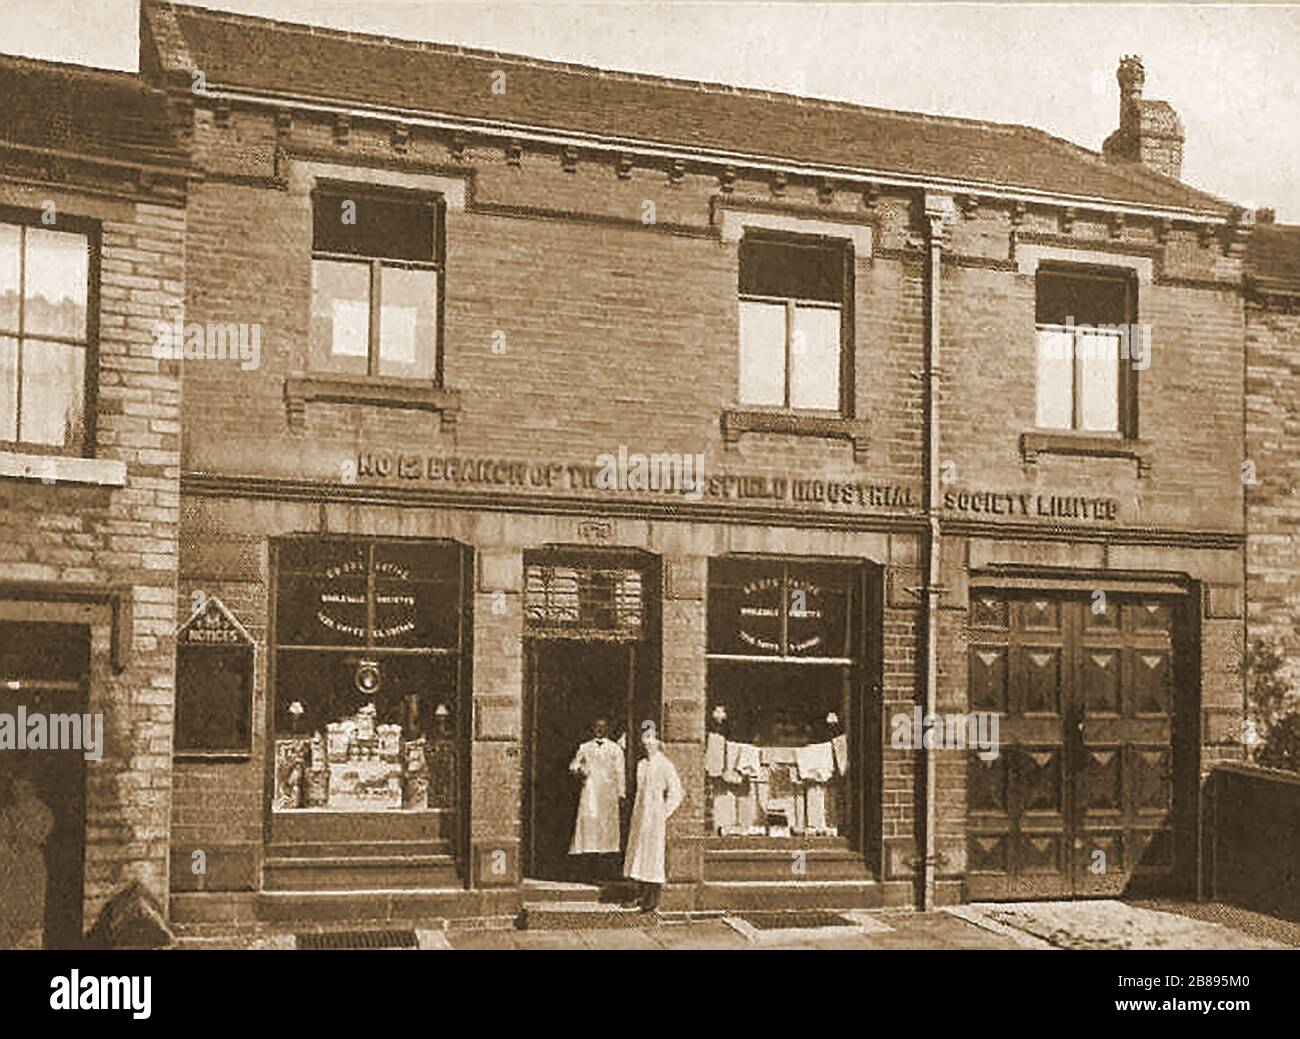 Huddersfield Industrial Society - An early photograph of Lowerhouses Grocery Store Stock Photo